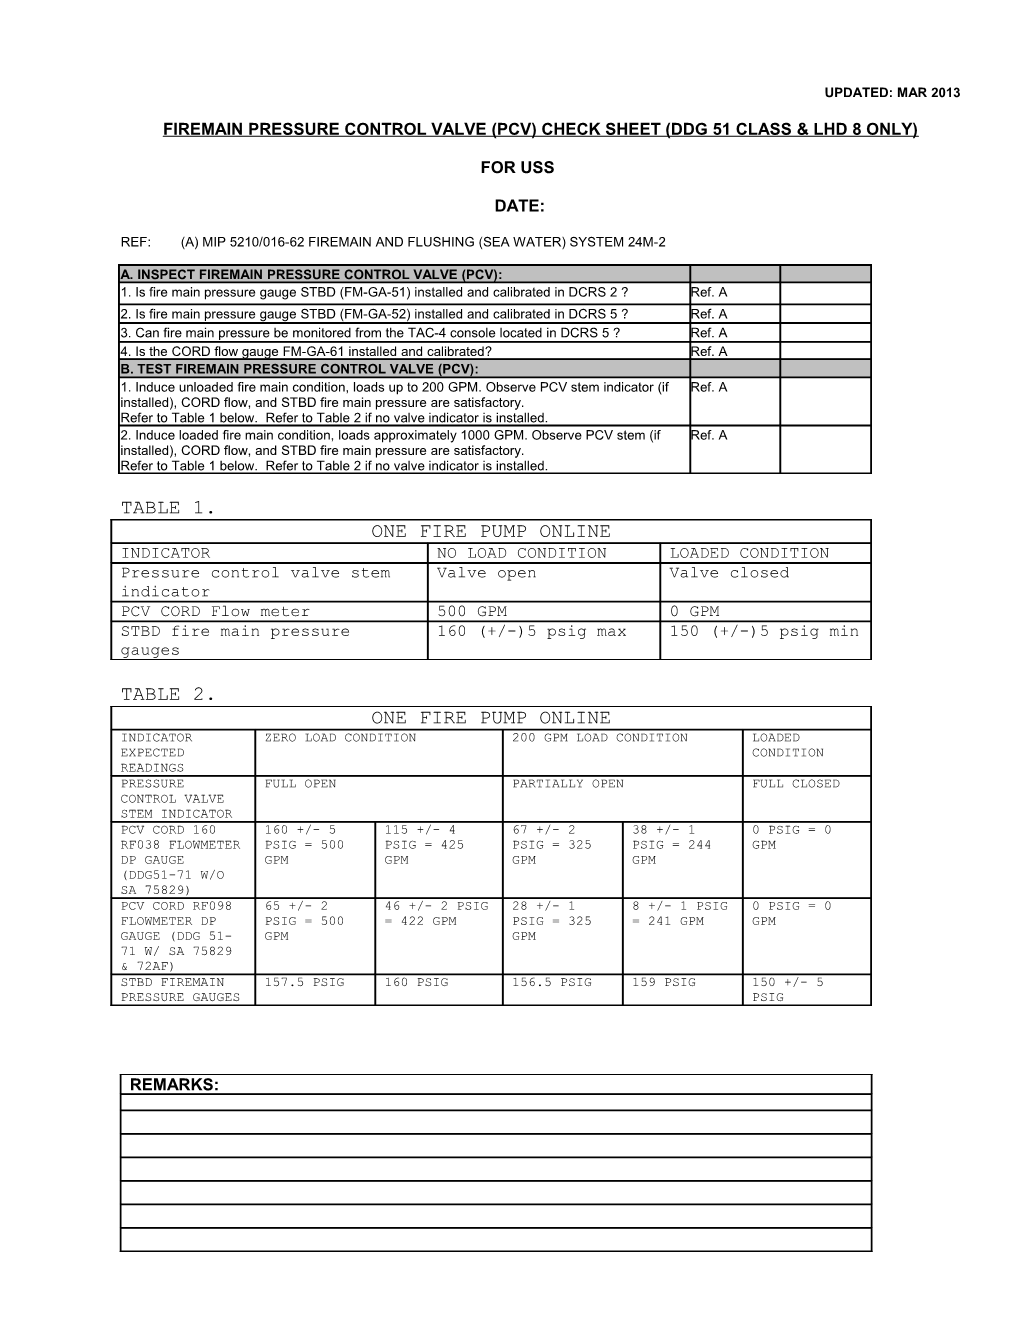 Firemain Pressure Control Valve (Pcv) Check Sheet (Ddg 51 Class & Lhd 8 Only)